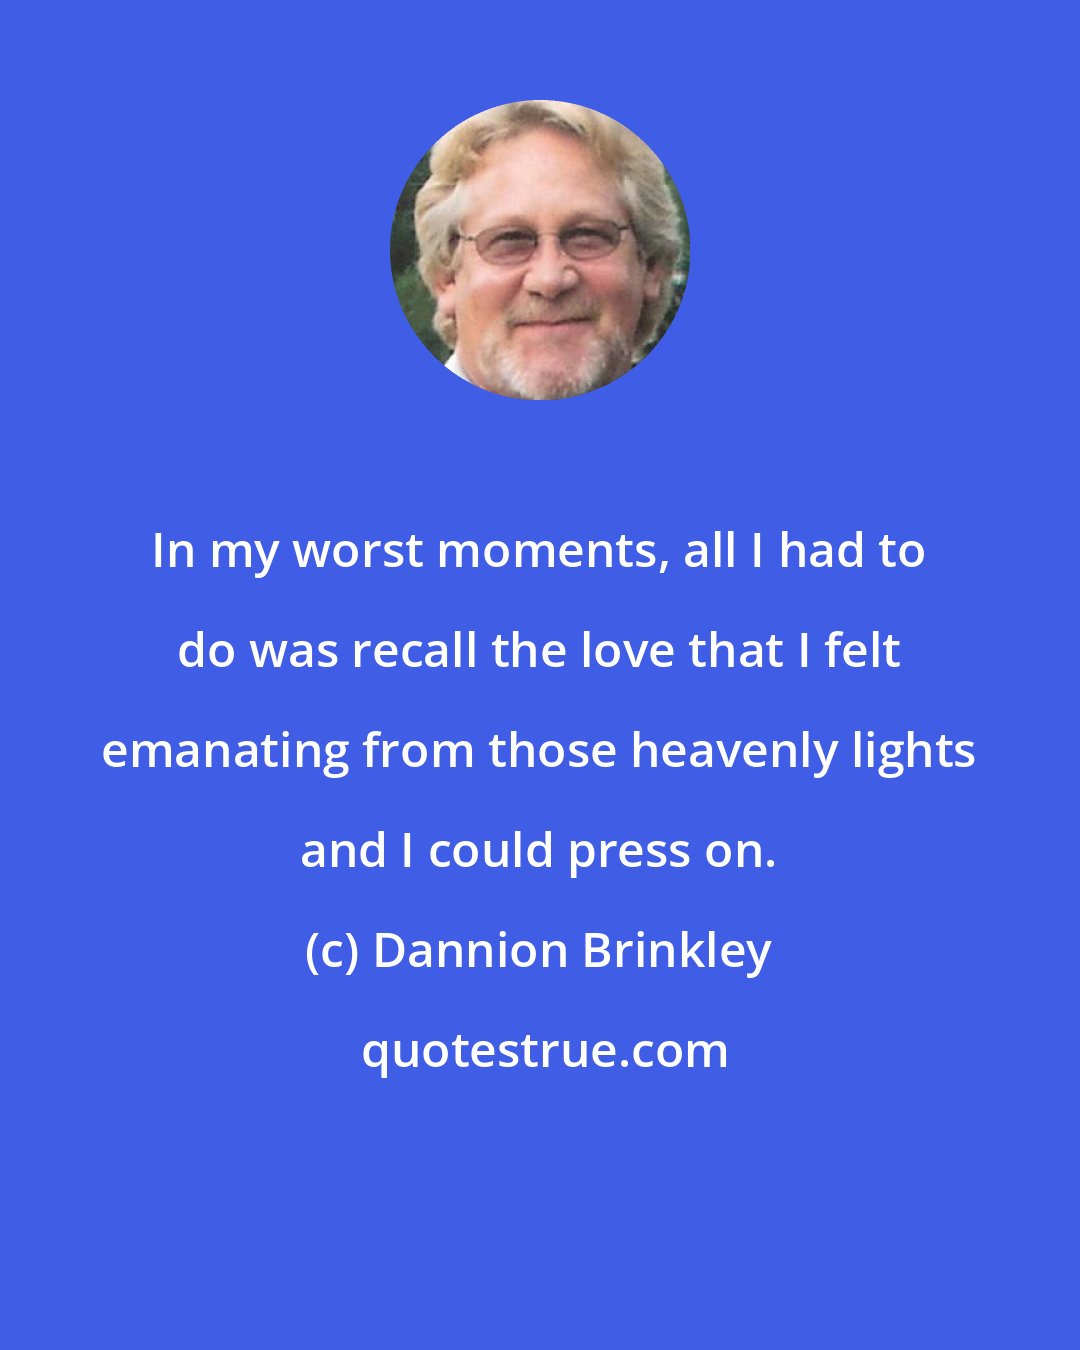 Dannion Brinkley: In my worst moments, all I had to do was recall the love that I felt emanating from those heavenly lights and I could press on.